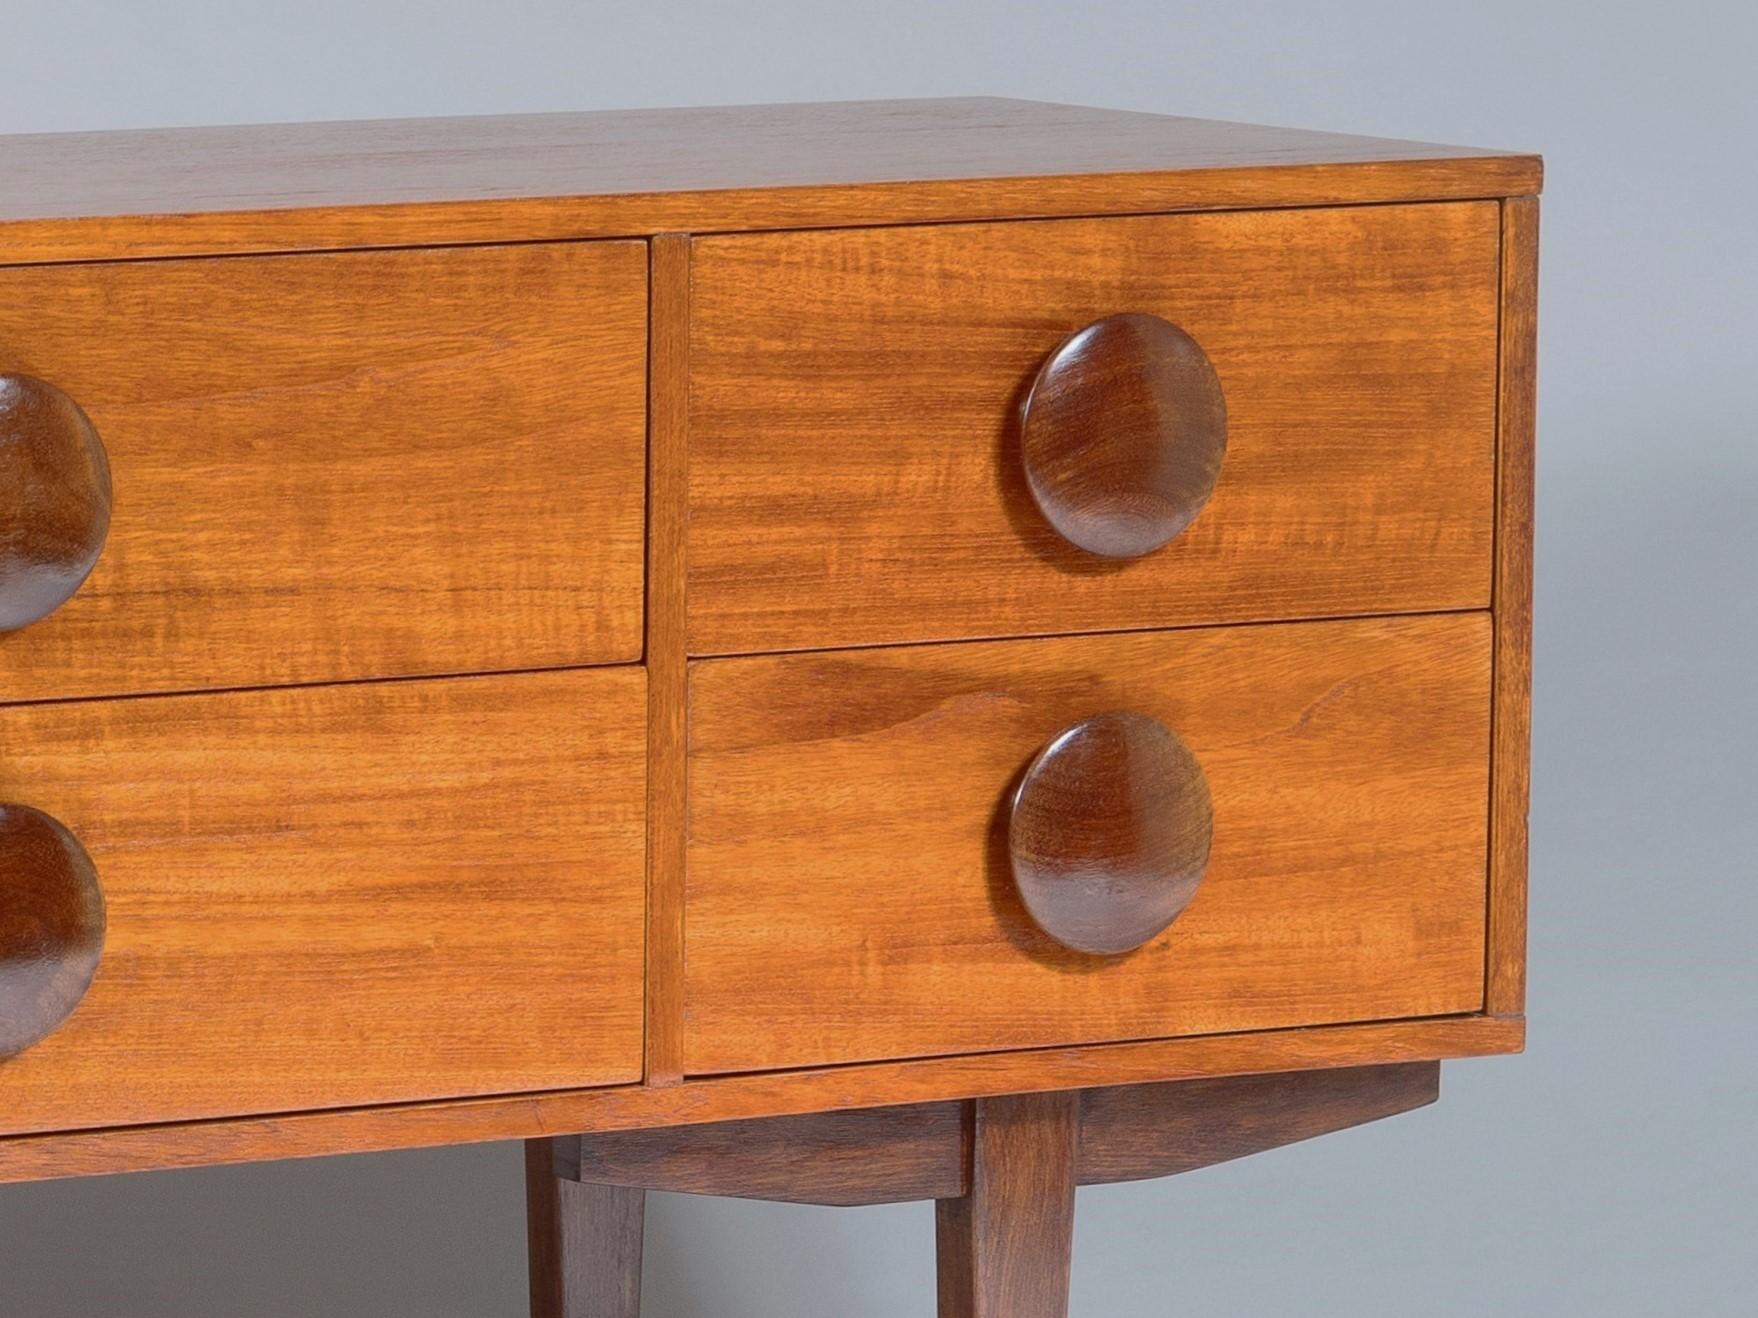 A 1960s Mid Century Button Handled Teak Sideboard  6 drawer Credenza For Sale 5